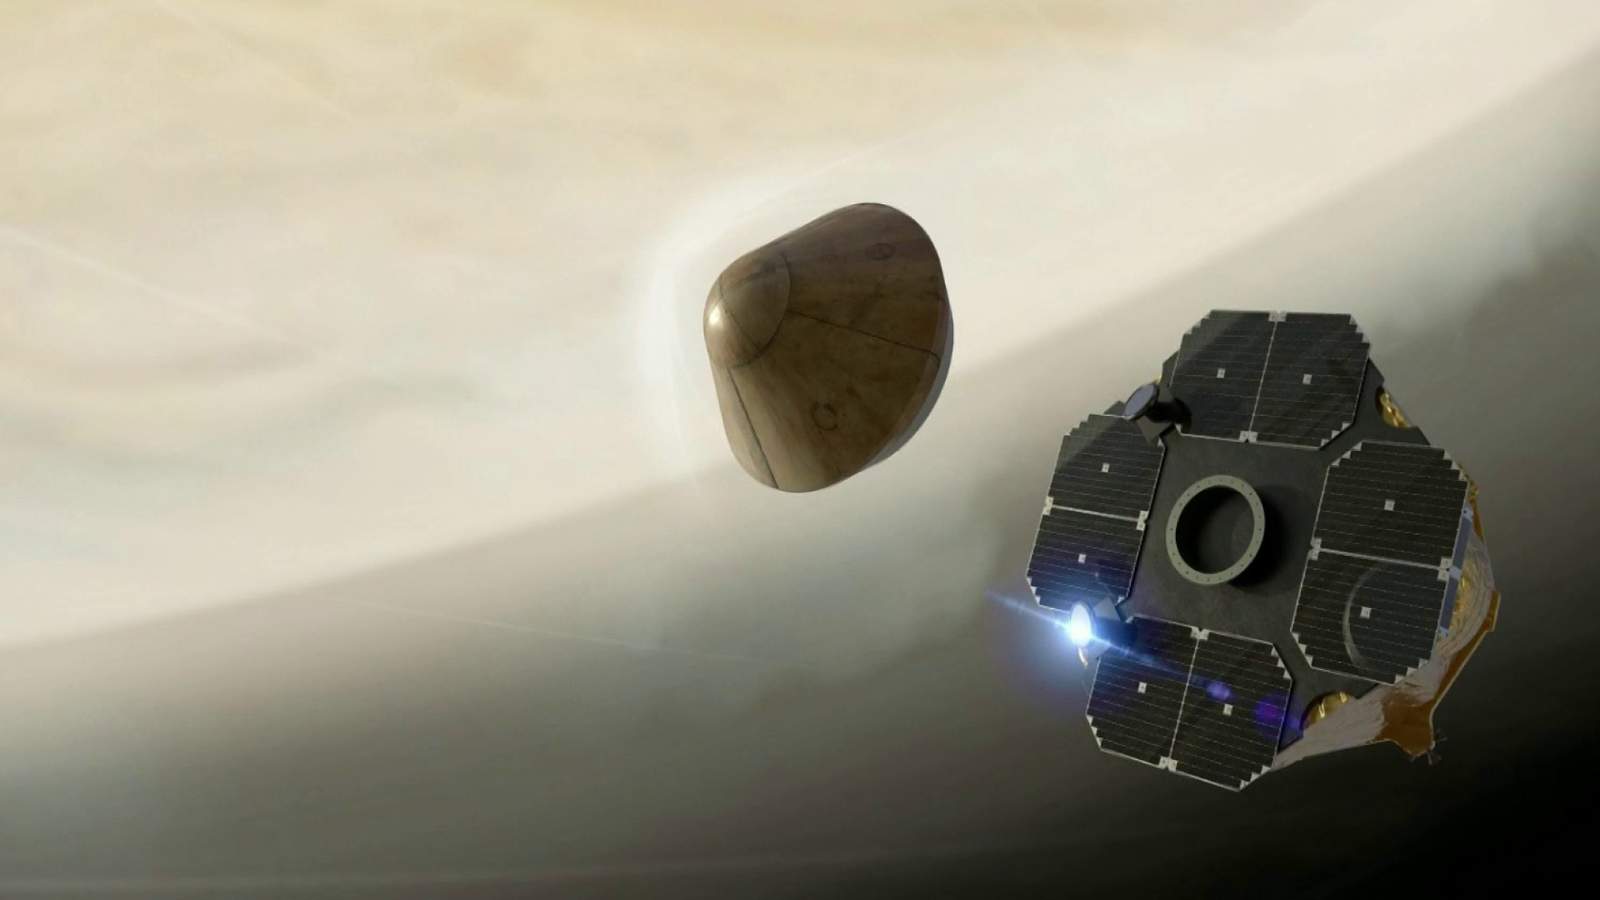 There’s more than 1 way to send a spacecraft to Venus